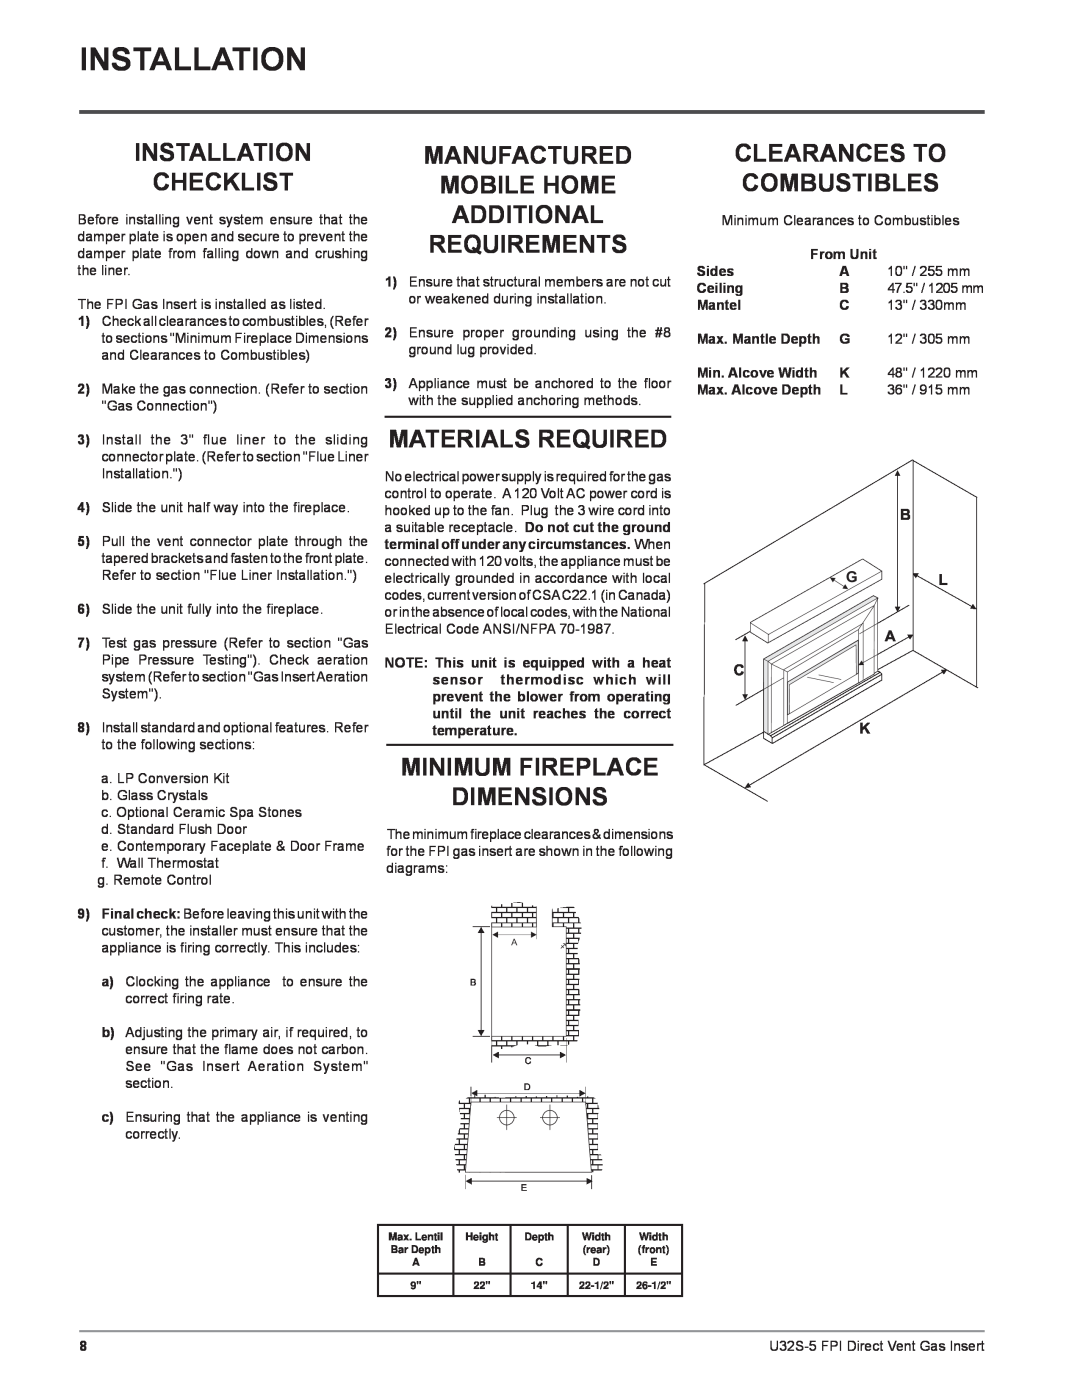 Regency U32S-NG5 Installation Checklist, Manufactured Mobile Home Additional Requirements, Materials Required, Sides 